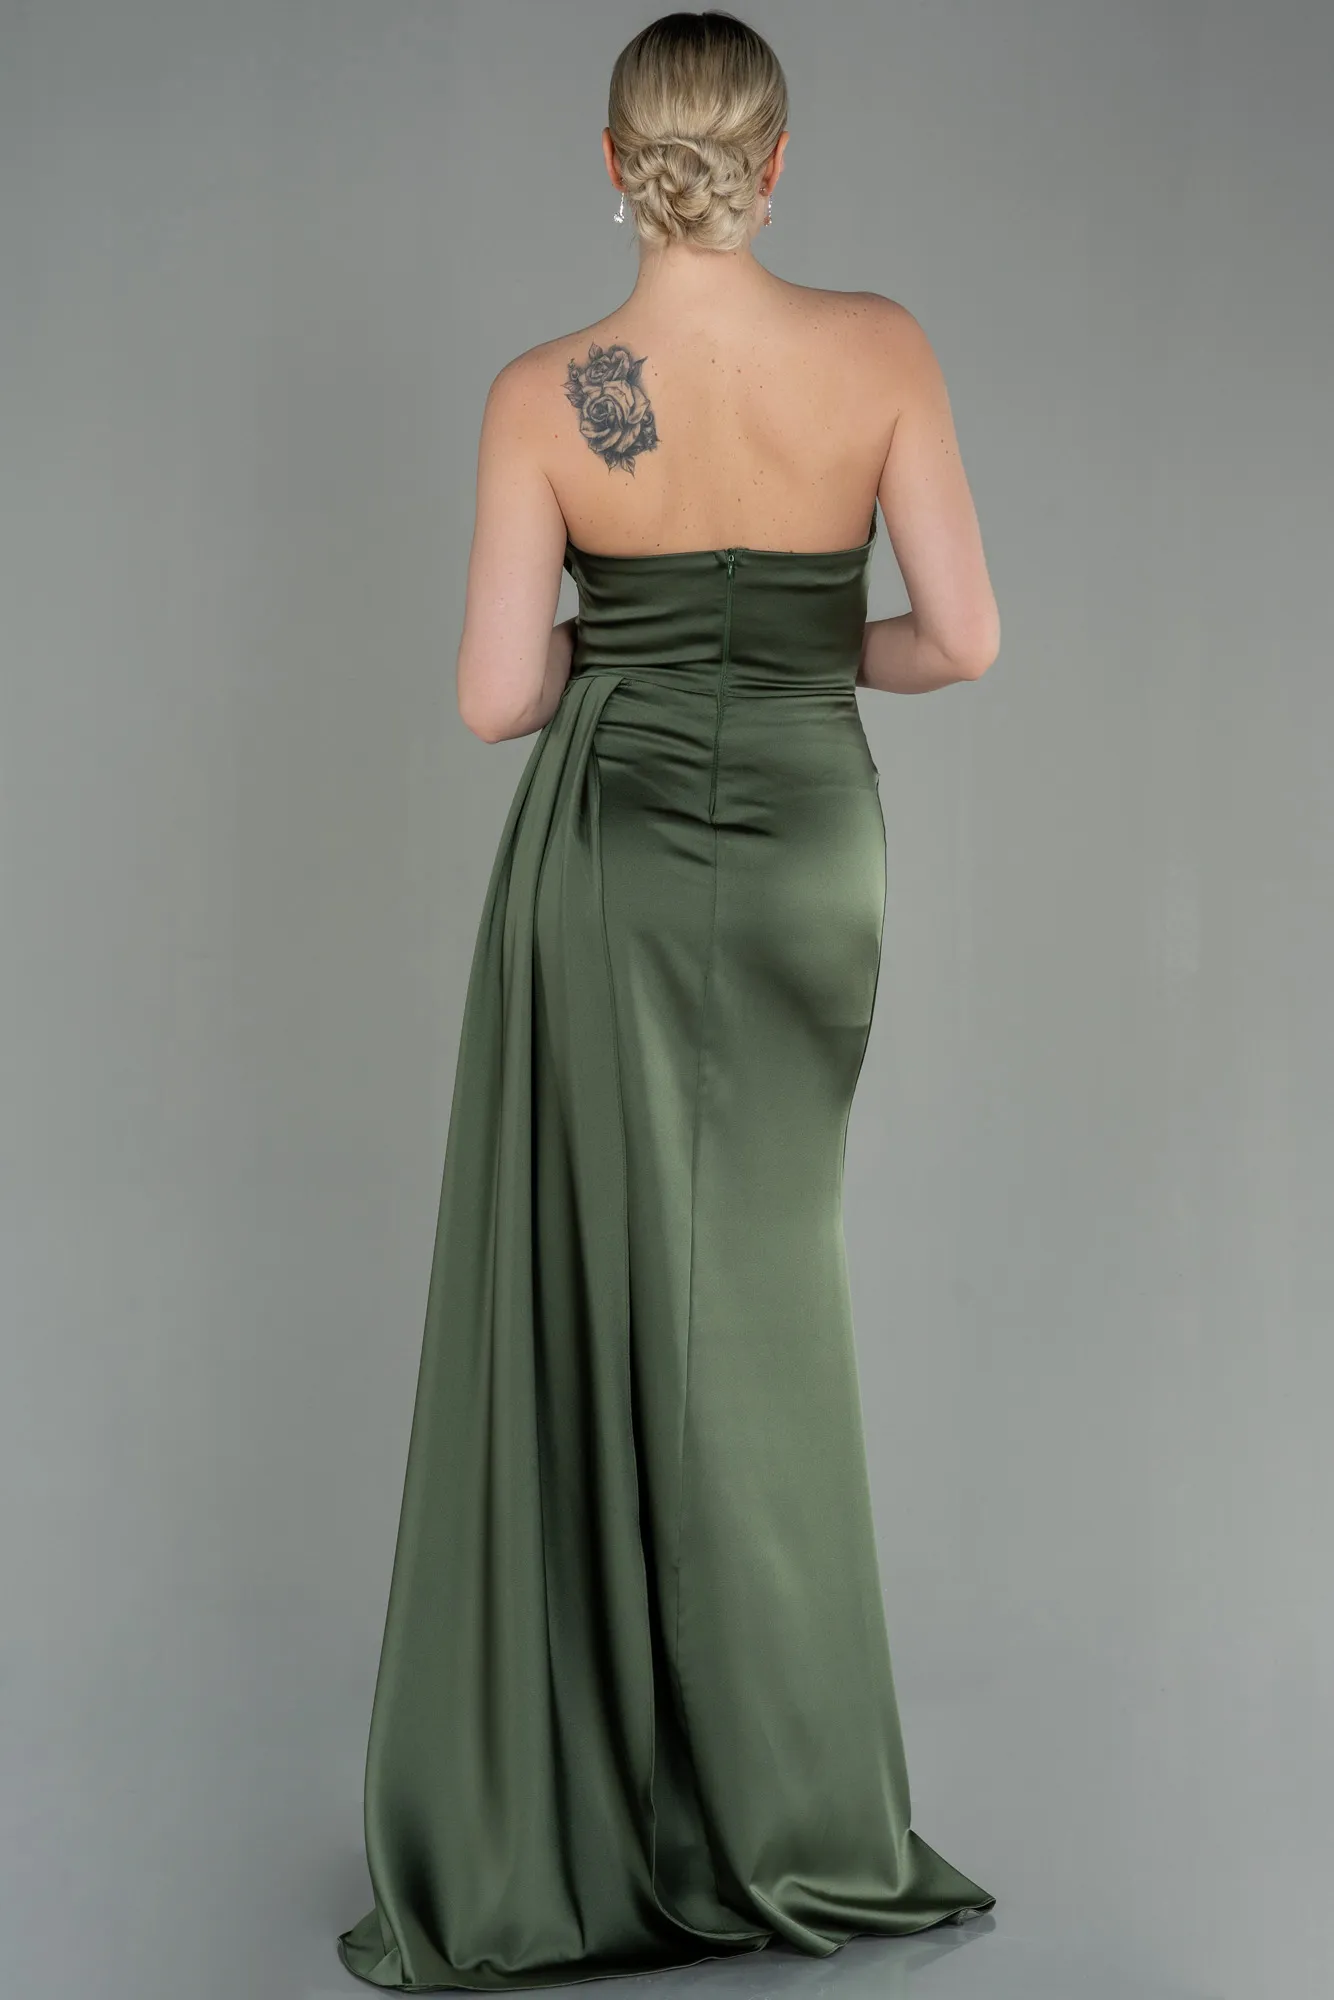 Oil Green-Long Satin Prom Gown ABU2965